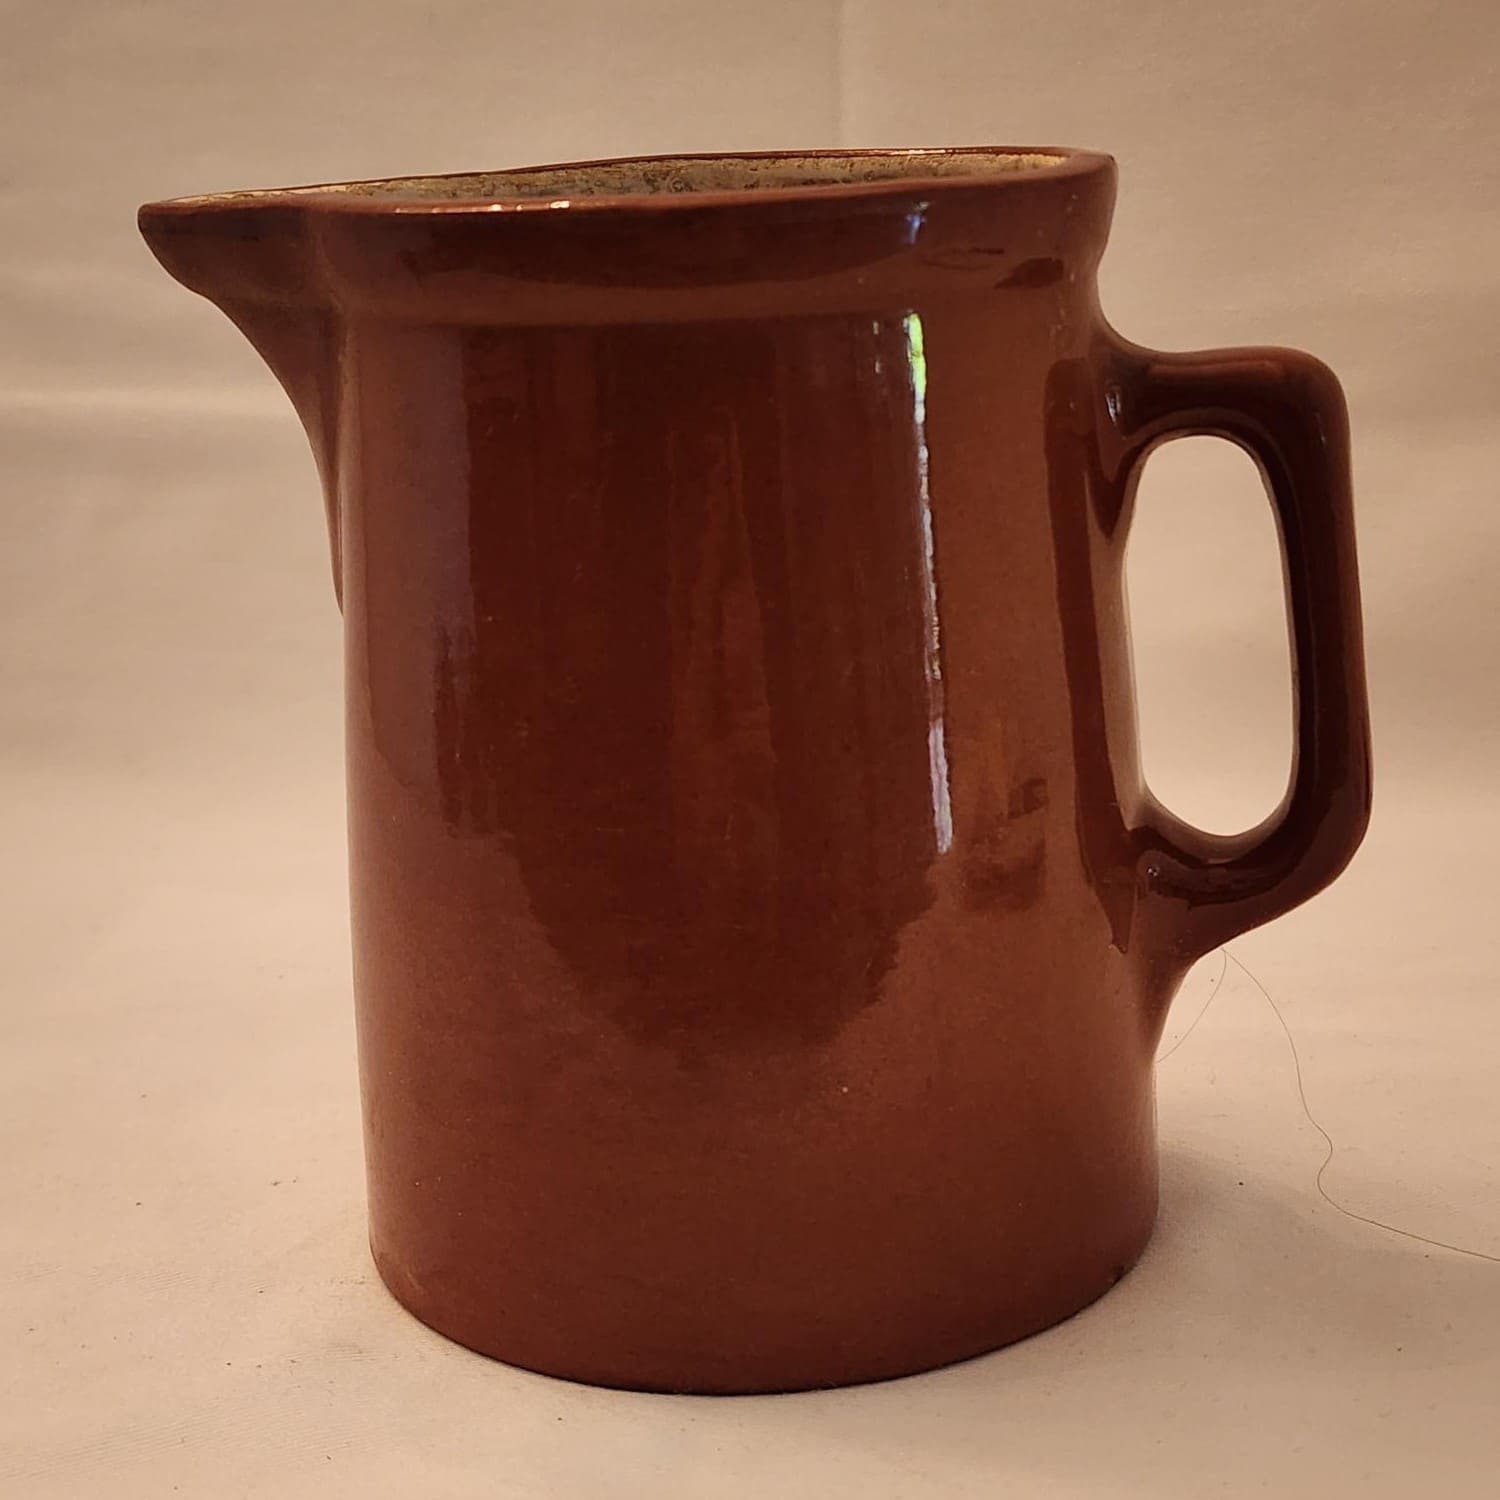 A brown jug with a handle on a white background.